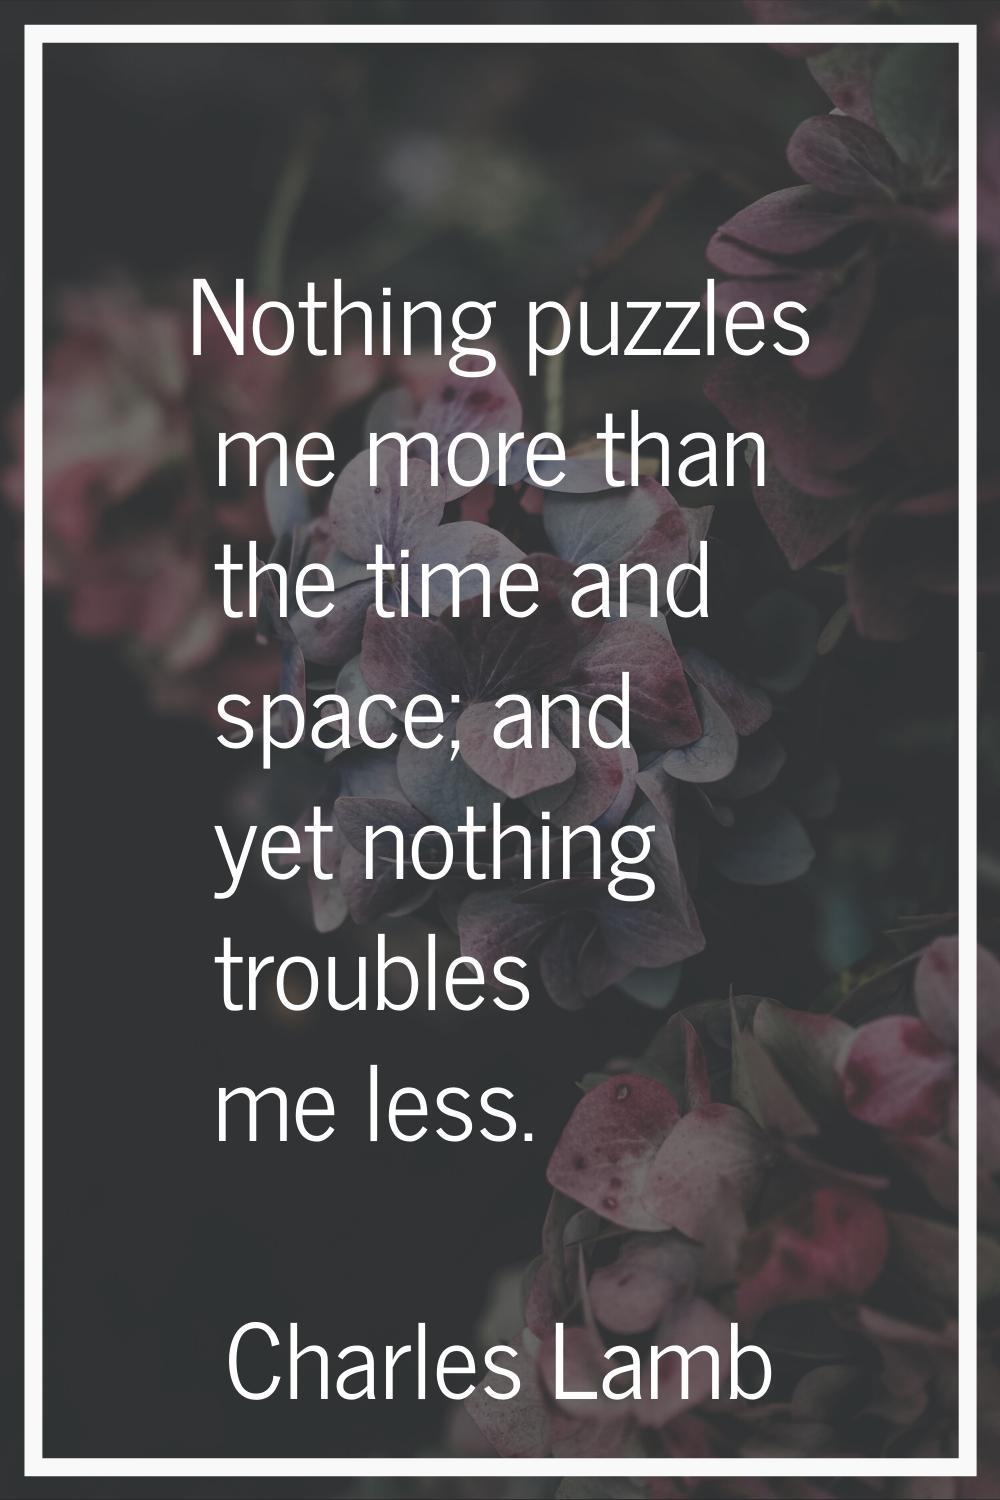 Nothing puzzles me more than the time and space; and yet nothing troubles me less.